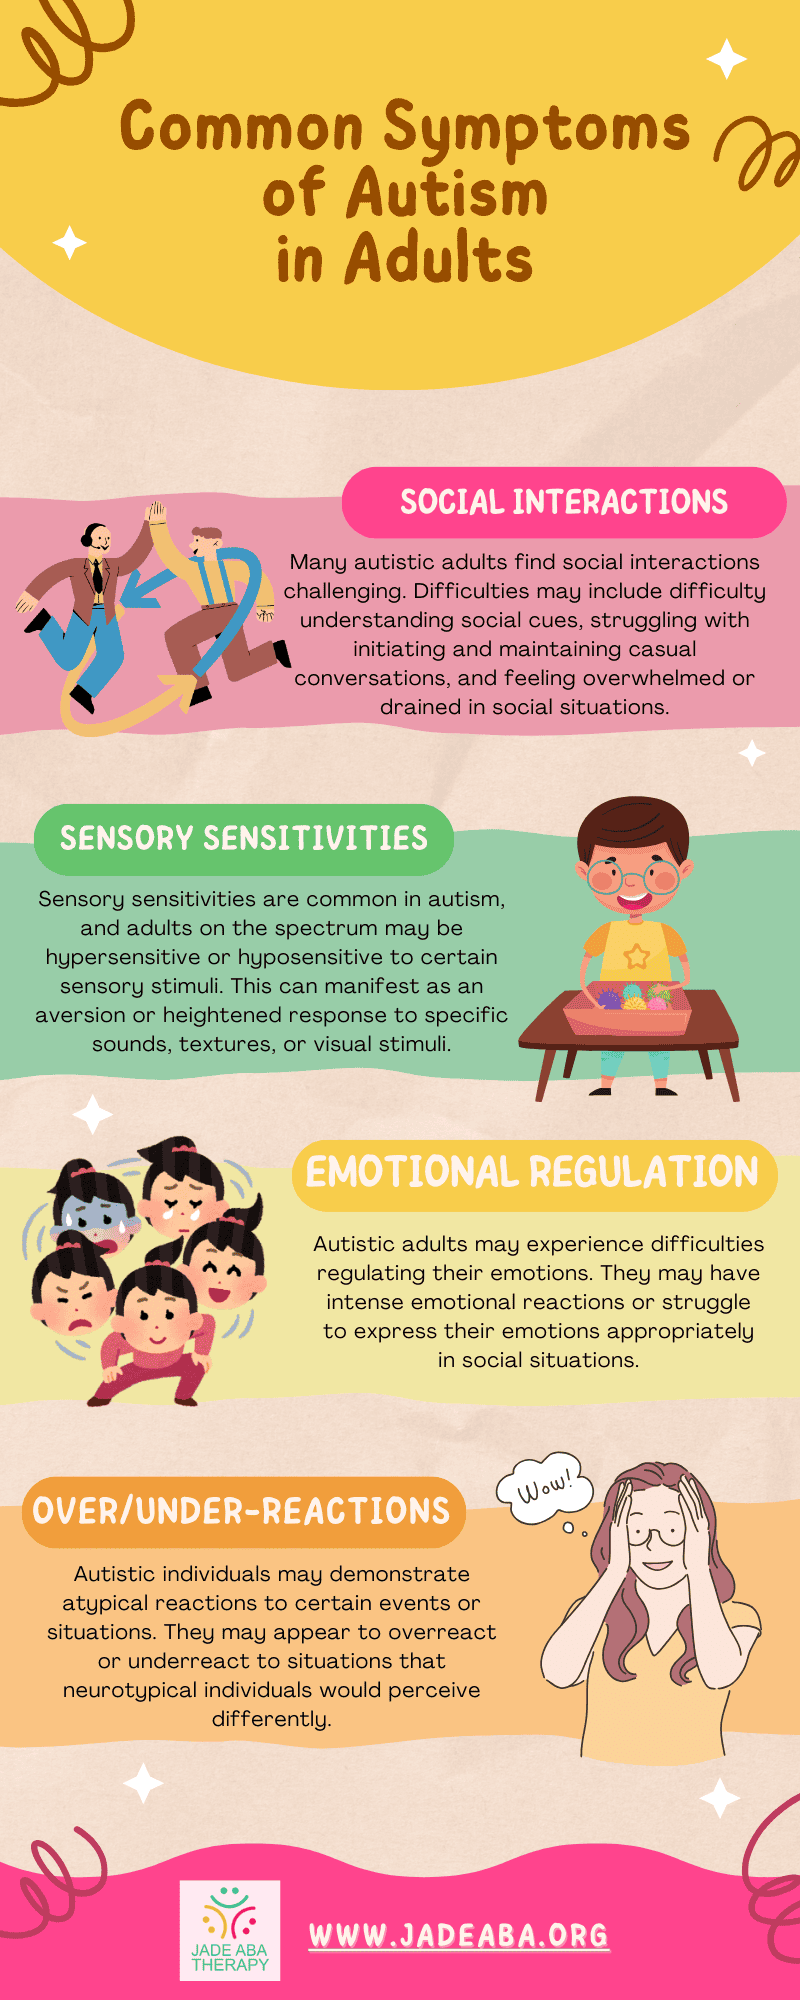 Common symptoms of autism in adults